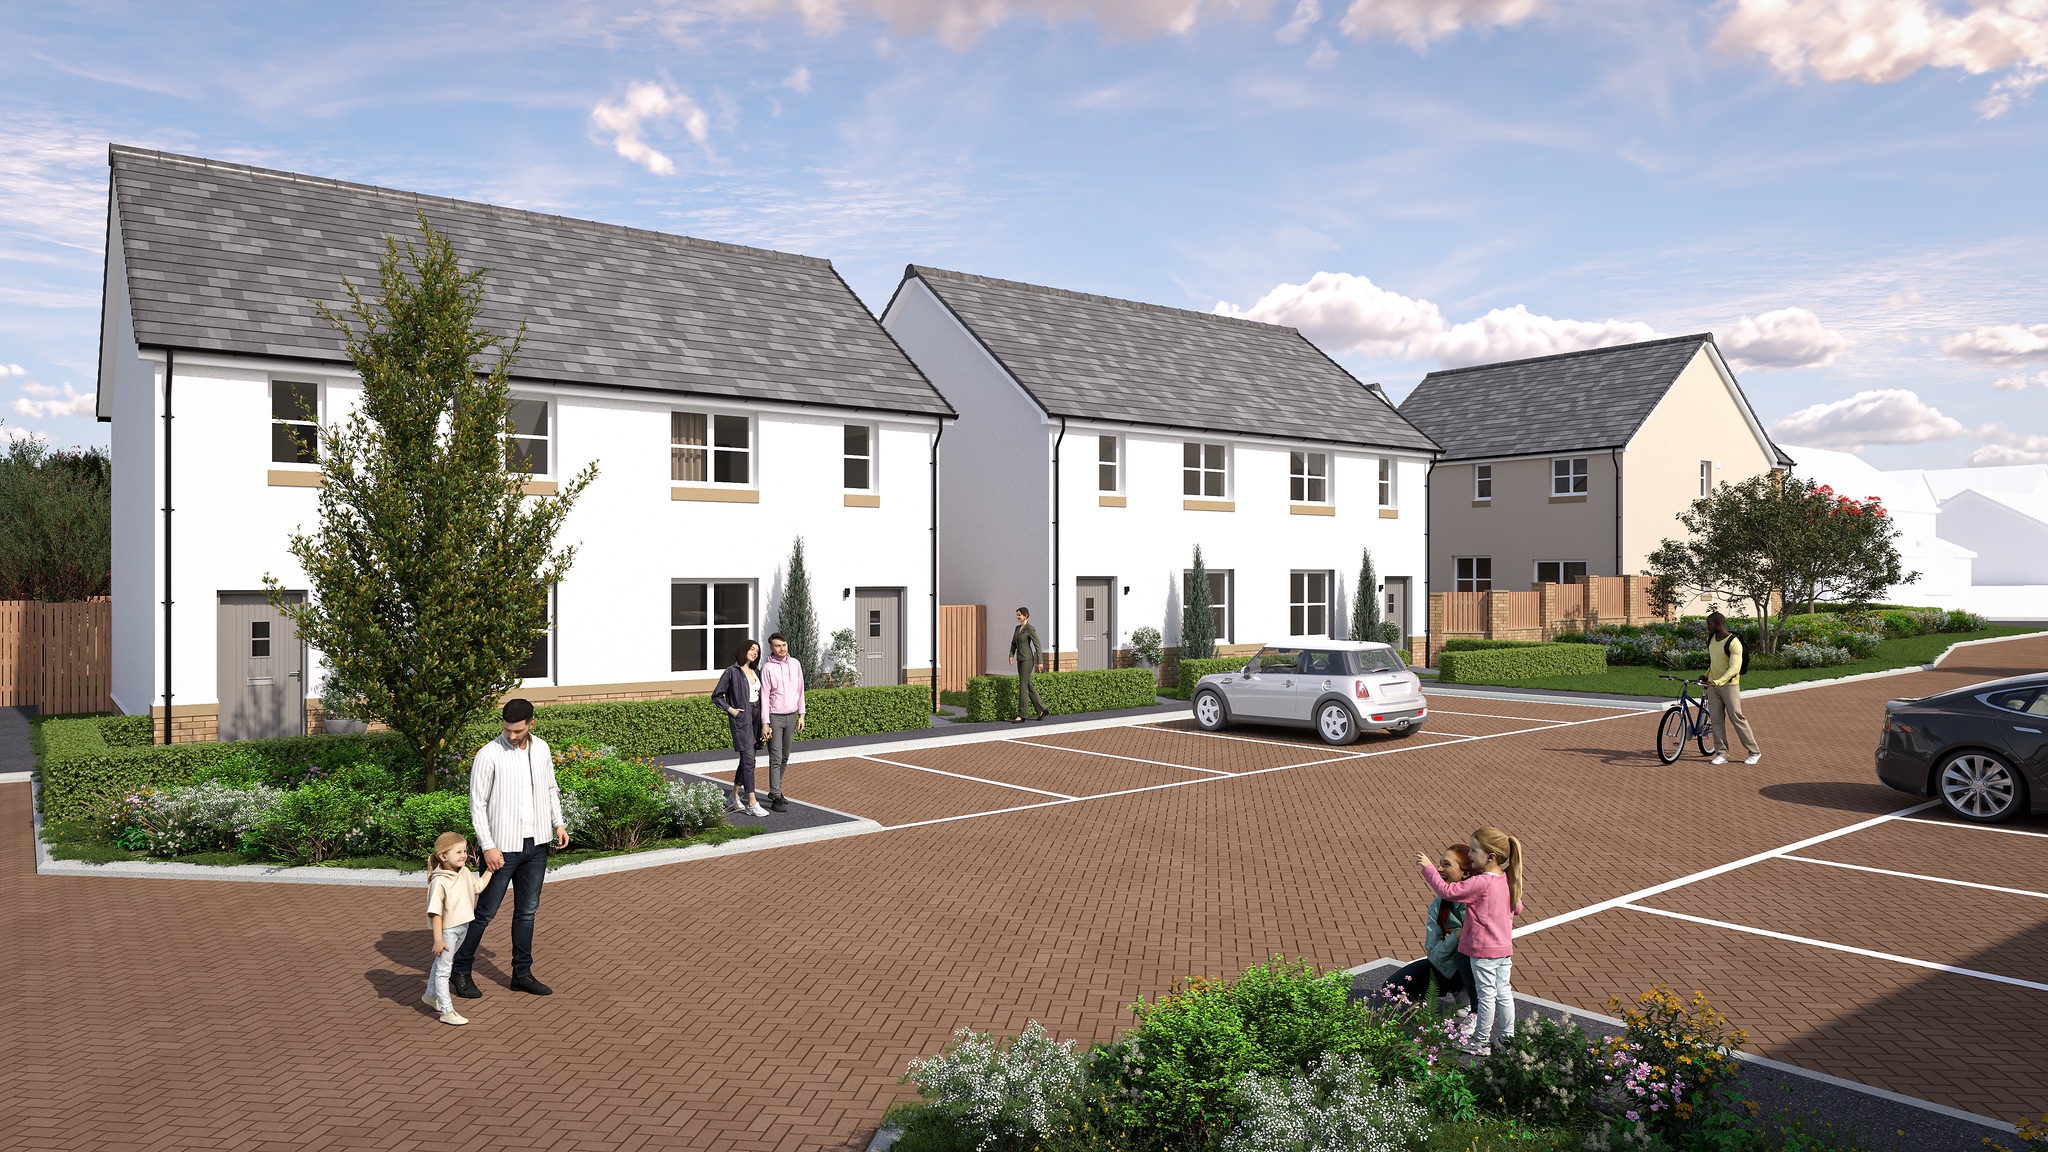 Property 2 of 8. CGI Street View Of Wellwater 